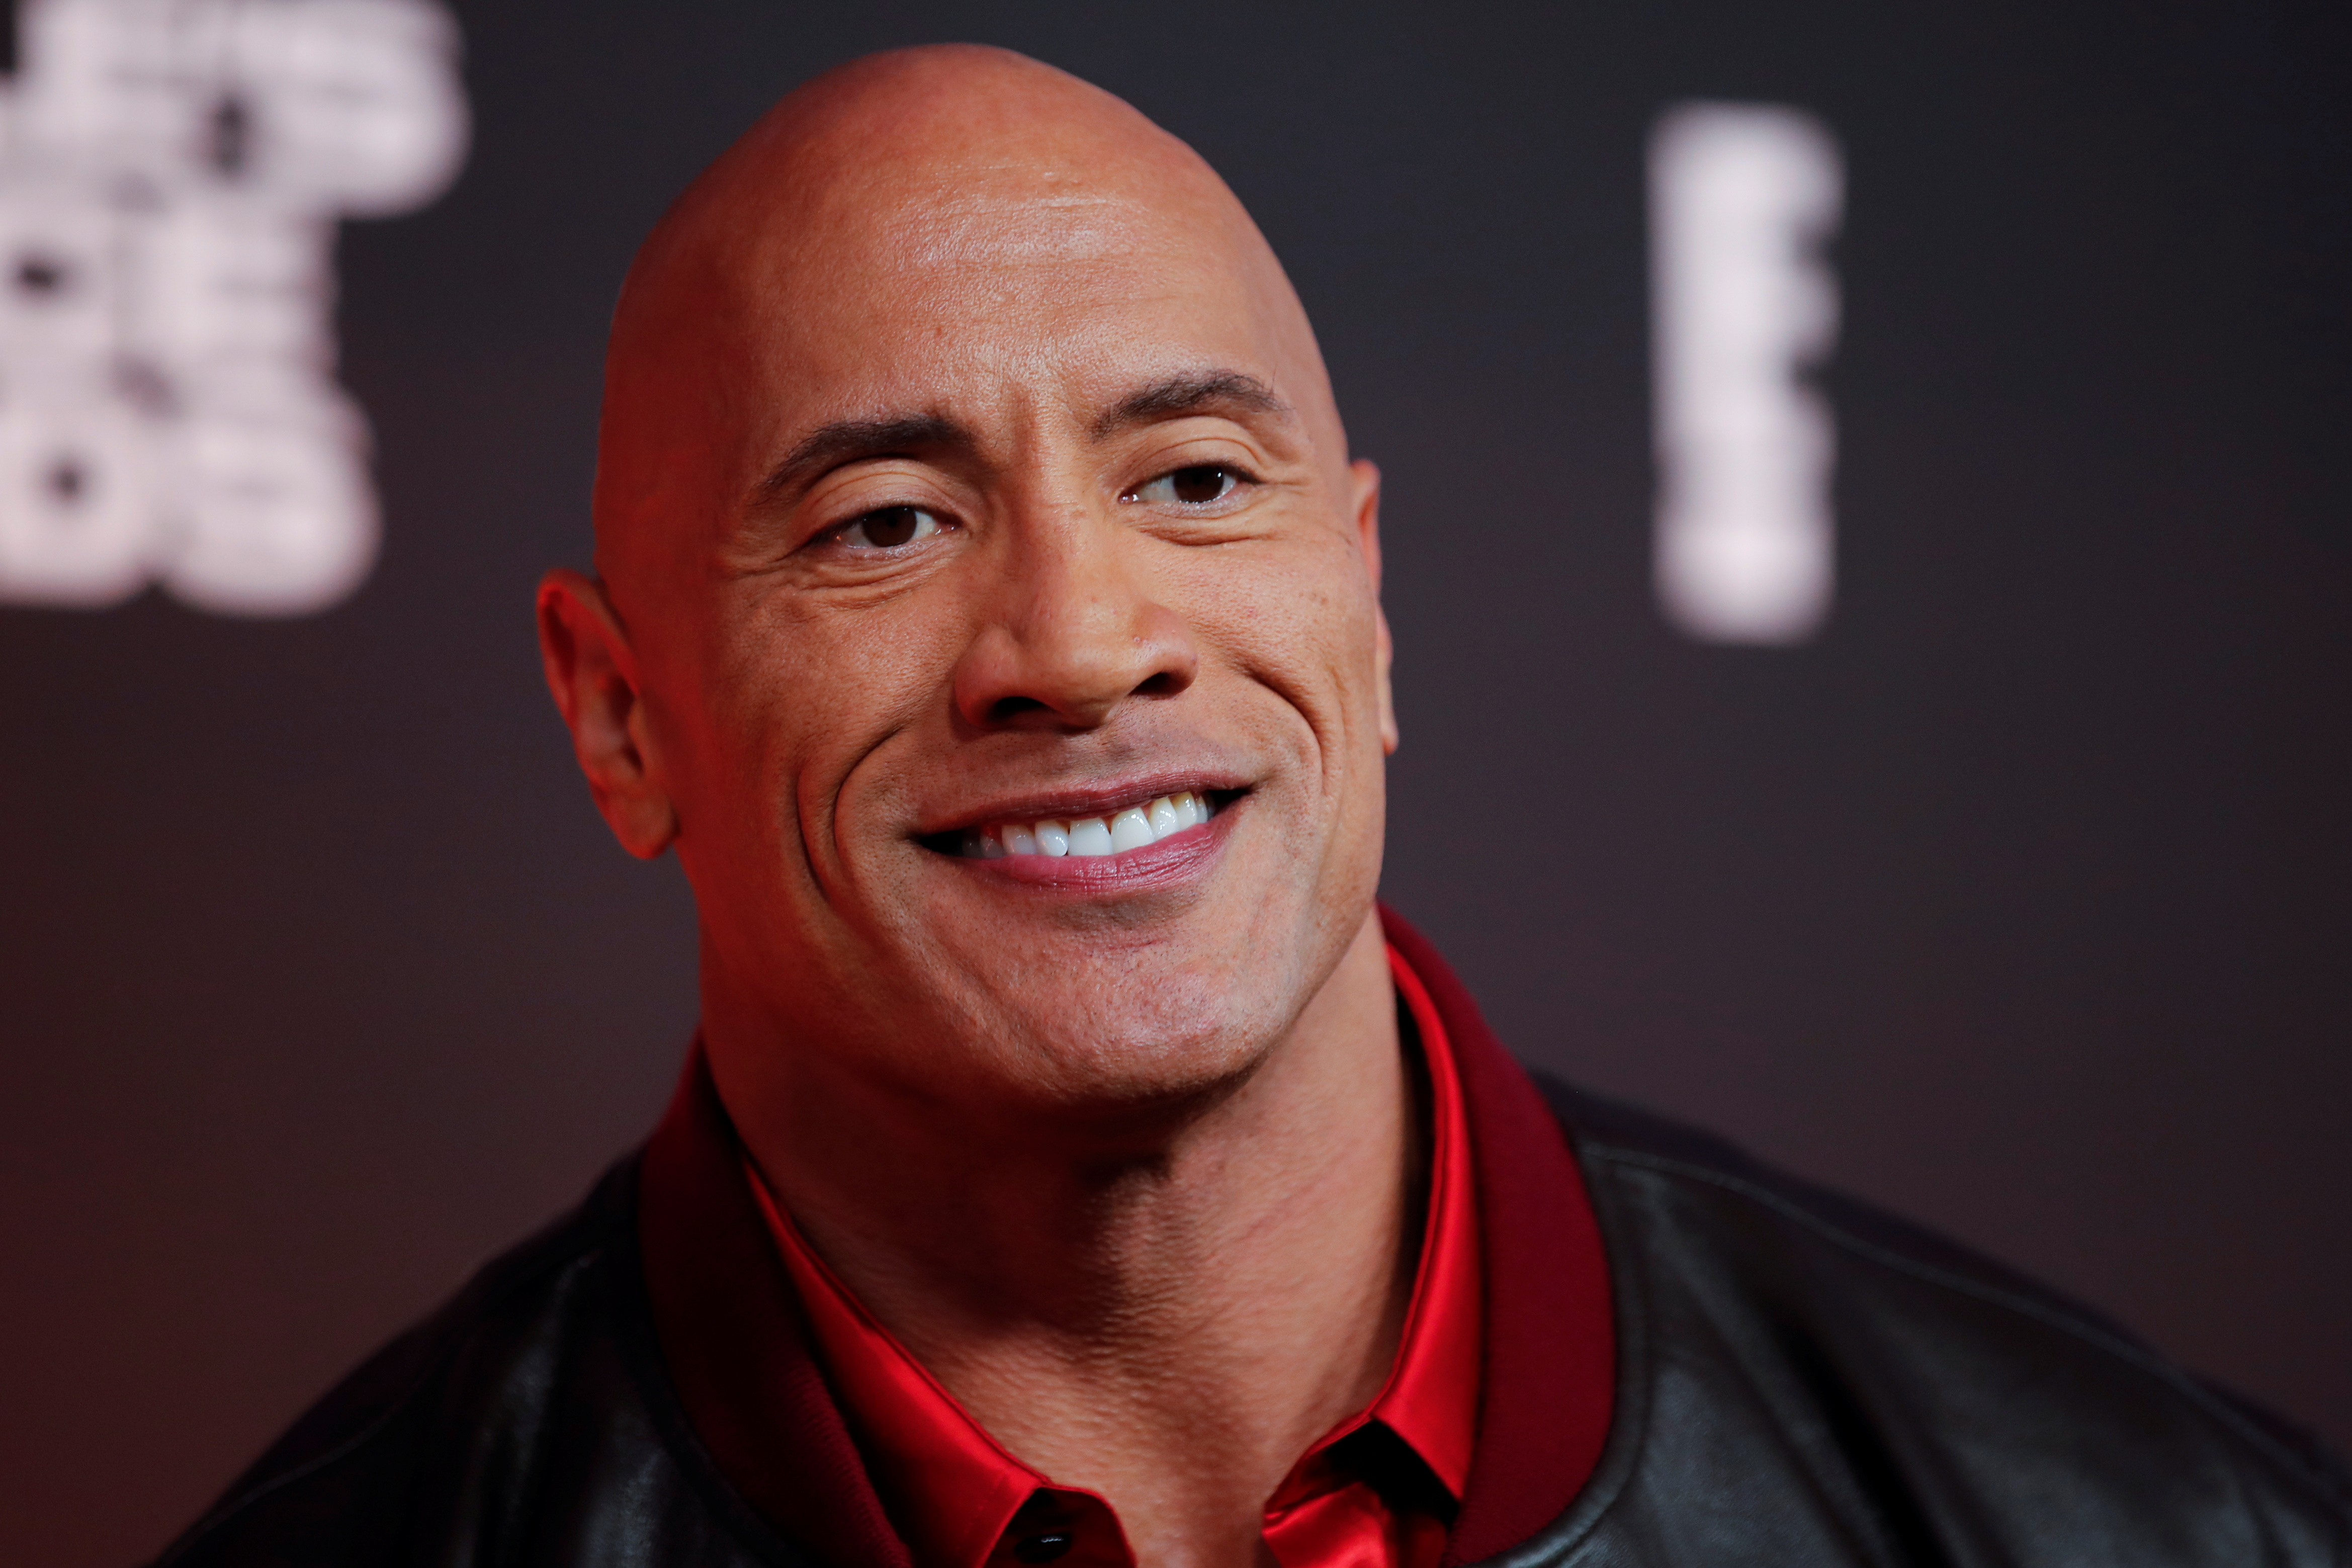 Dwayne Johnson opens up about mental health